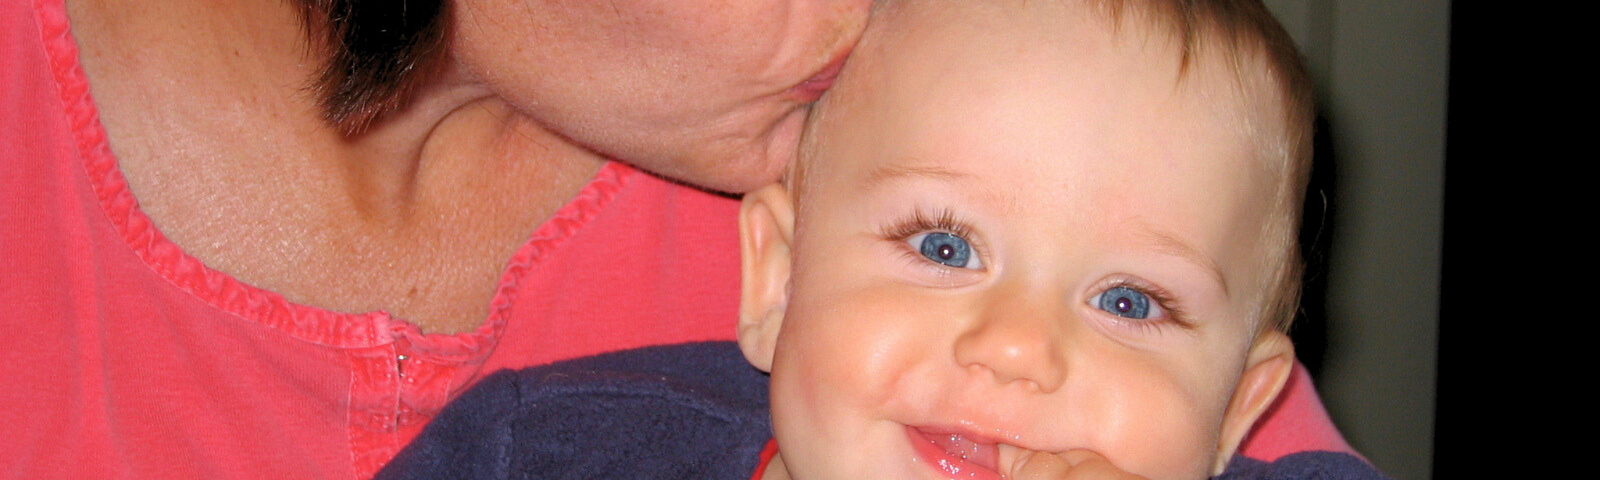 Closeup of a Mom kissing the top of her baby’s head, while baby is smiling at camera.